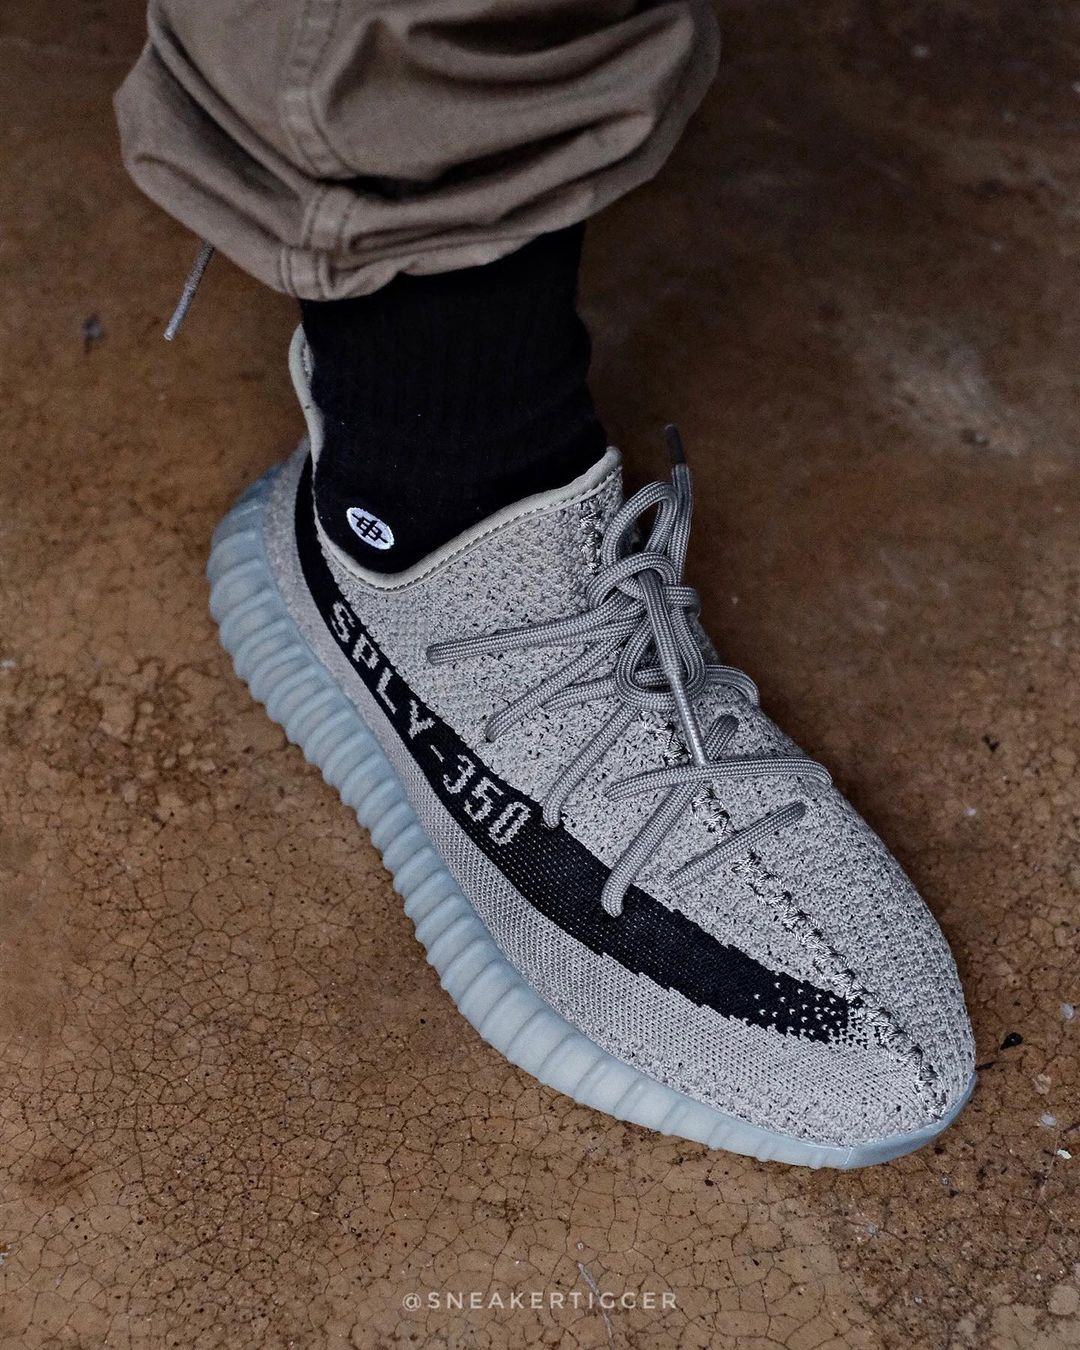 Accumulation Messed up Decompose adidas YEEZY BOOST 350 V2 "Granite" Release Date